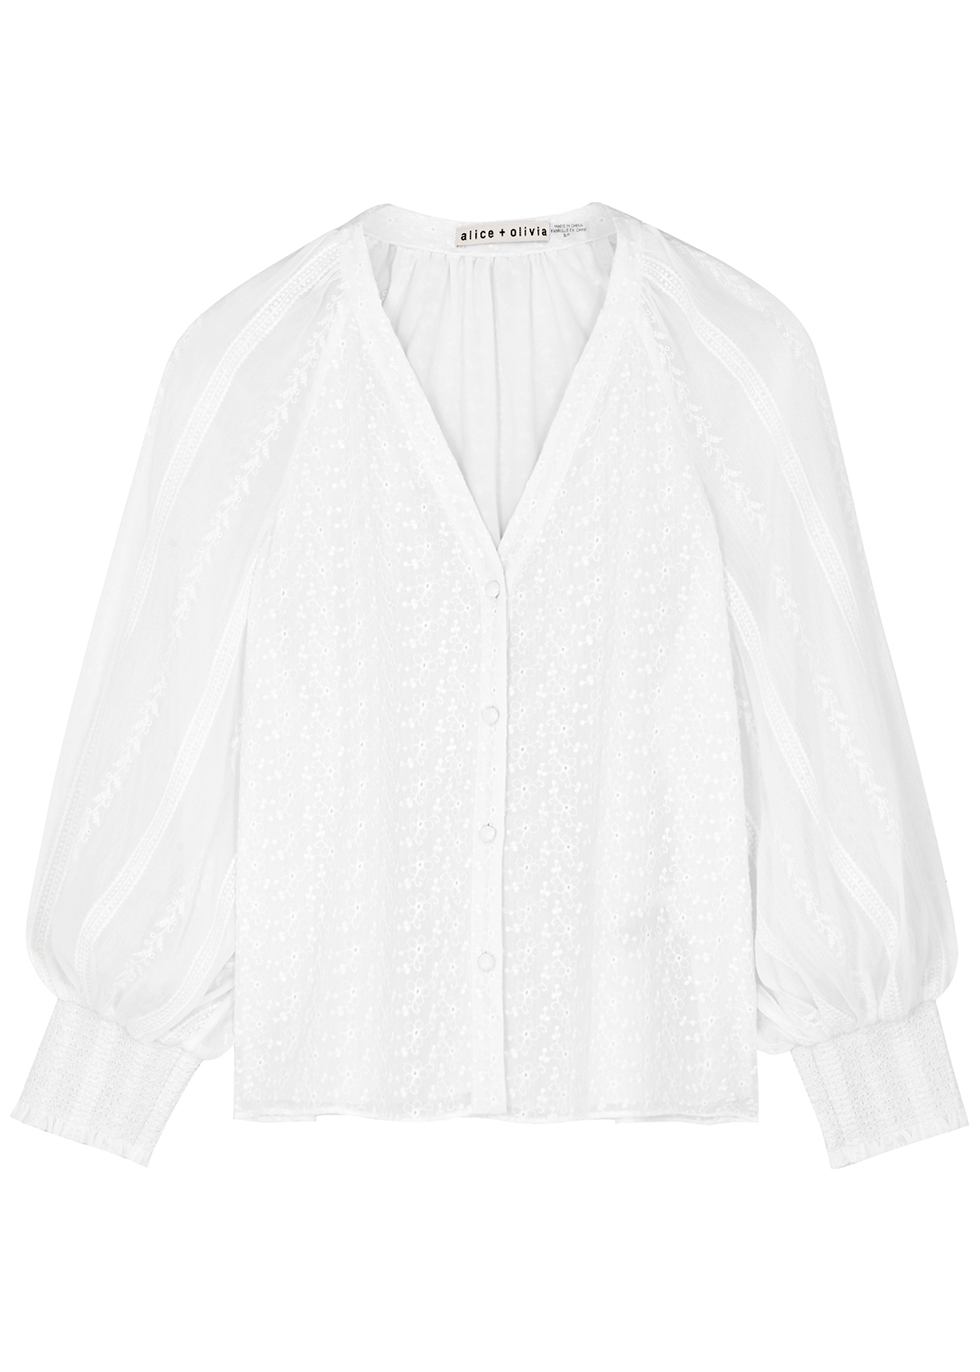 Shop Now For The Lang white floral-embroidered gauze blouse ...